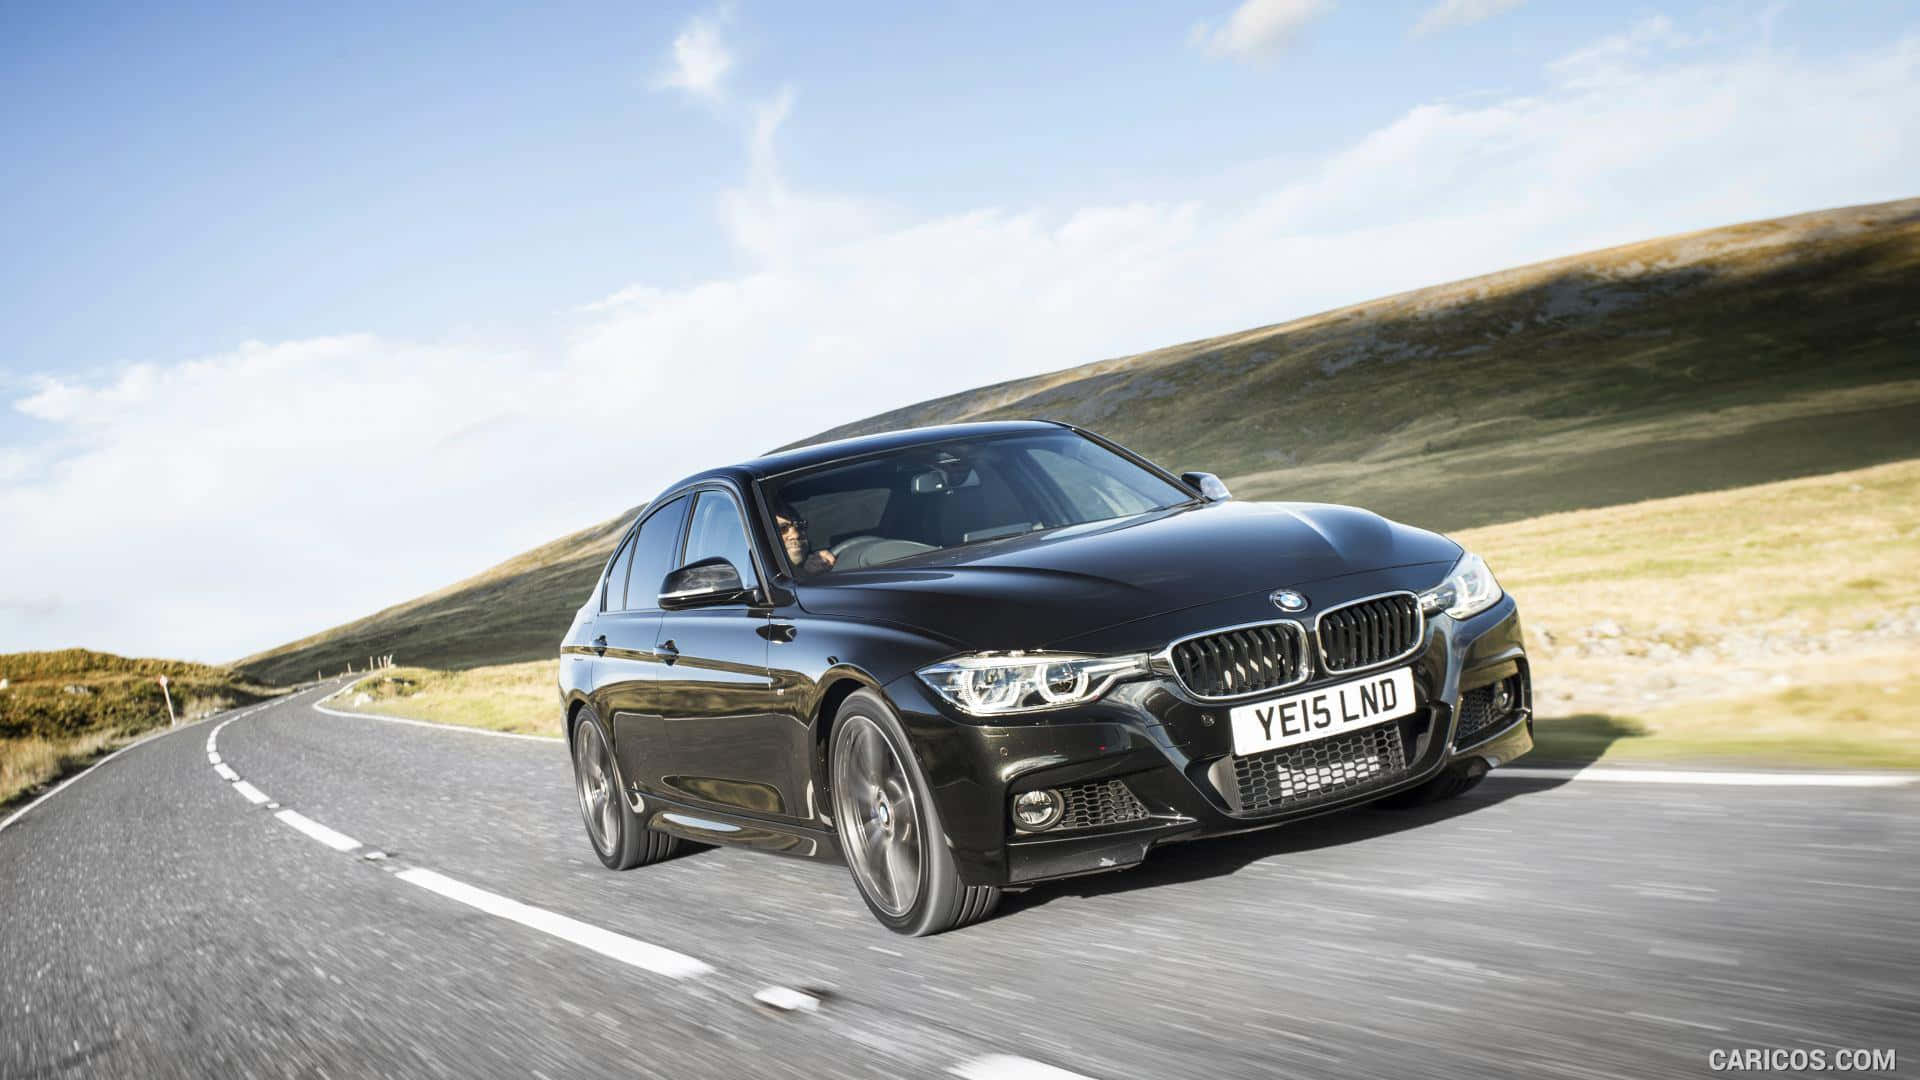 Experience BMW's cutting-edge performance with the M series